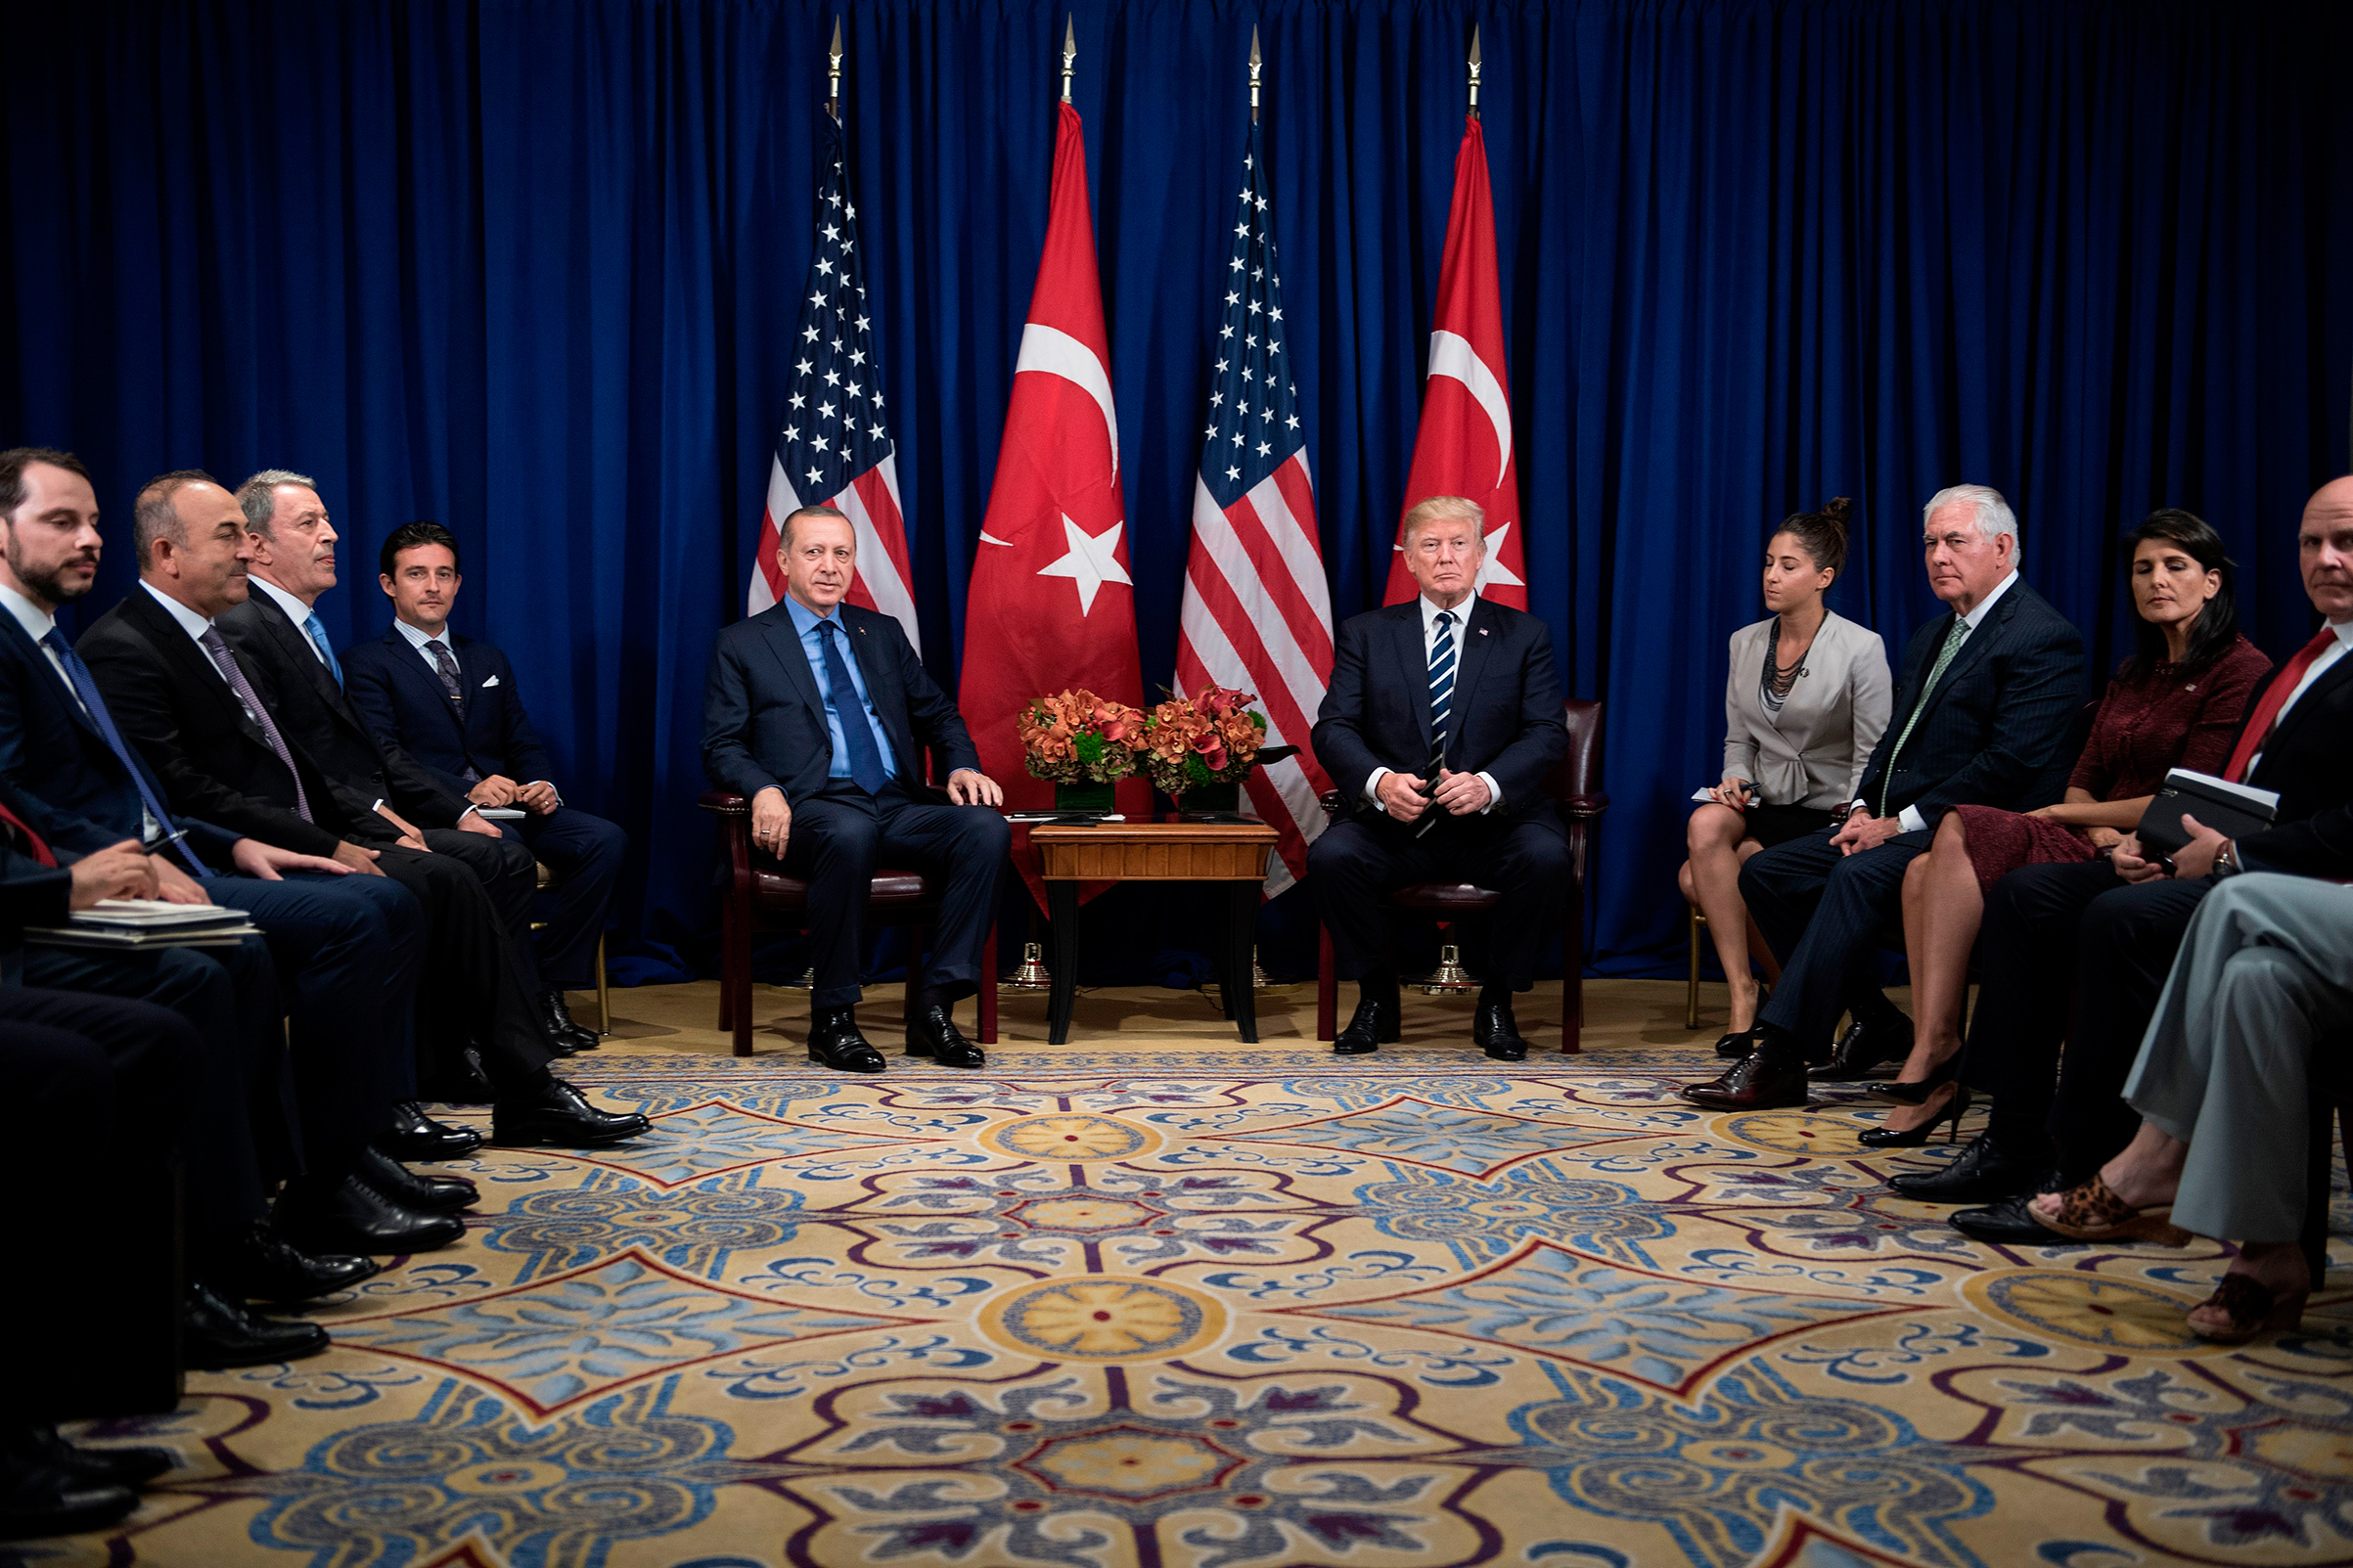 Turkey's President Recep Tayyip Erdogan and US President Donald Trump wait for a meeting at the Palace Hotel during the 72nd United Nations General Assembly Sept. 21, 2017 in New York City. (Brendan Smialowski—AFP/Getty Images)